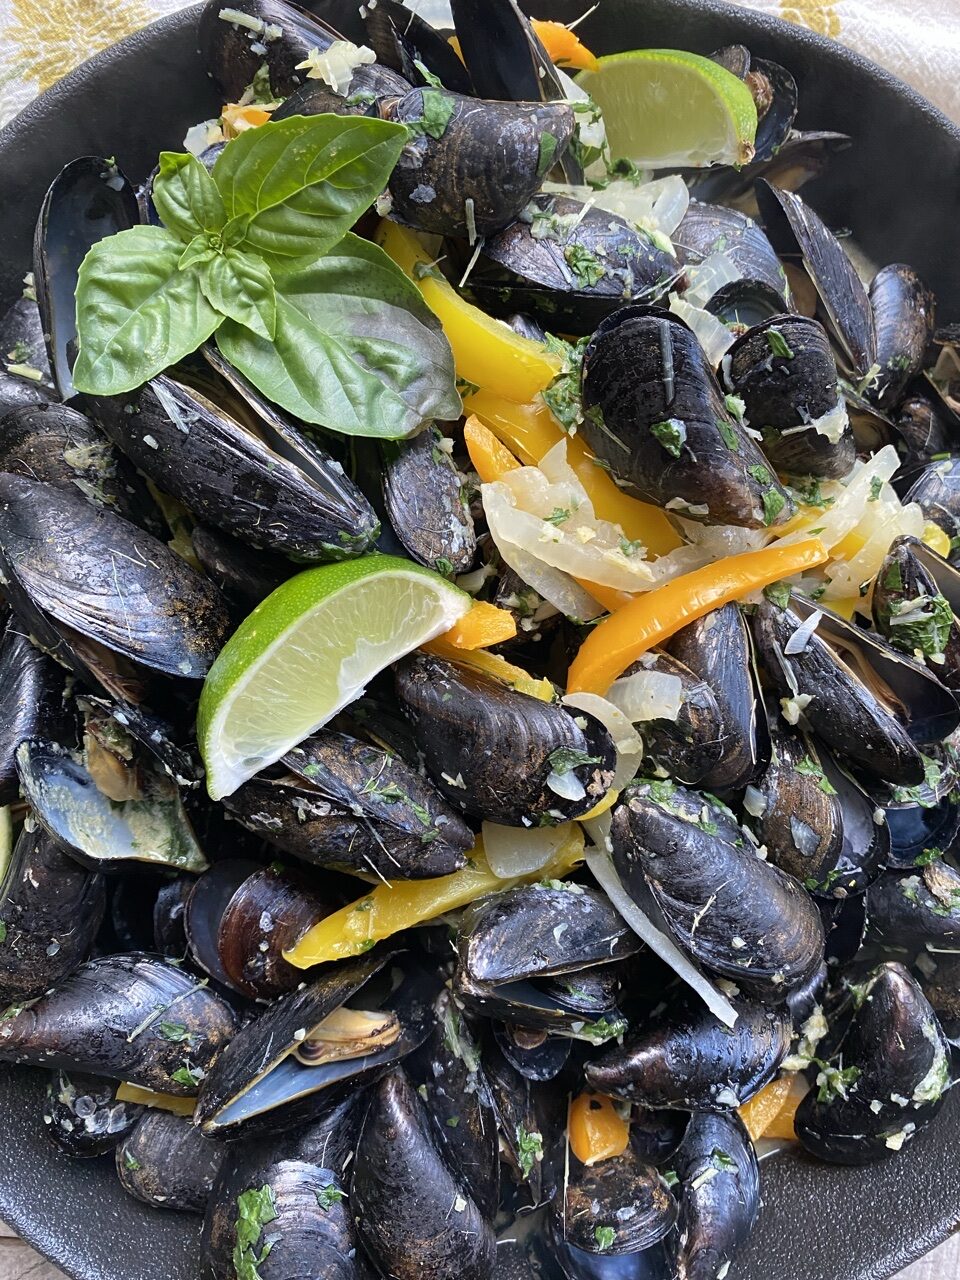 59EE0533 A7F1 44C1 B78A 65FCD7E81A4F e1625846149917 - Green Curry Lemongrass Mussels with Peppers & Onions